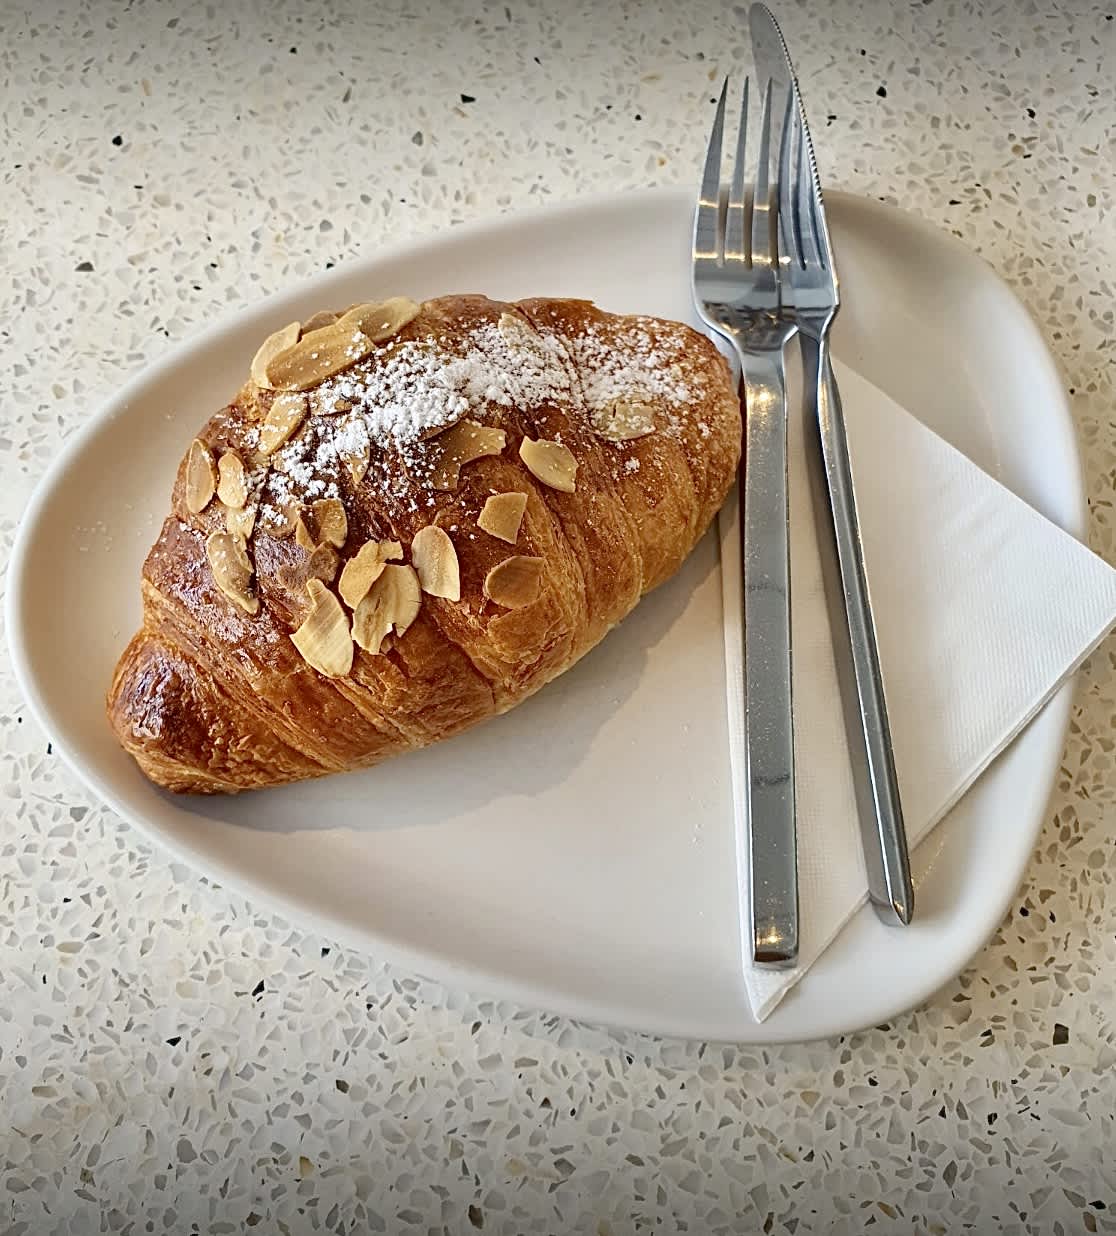 Warm Almond Croissant was to die for